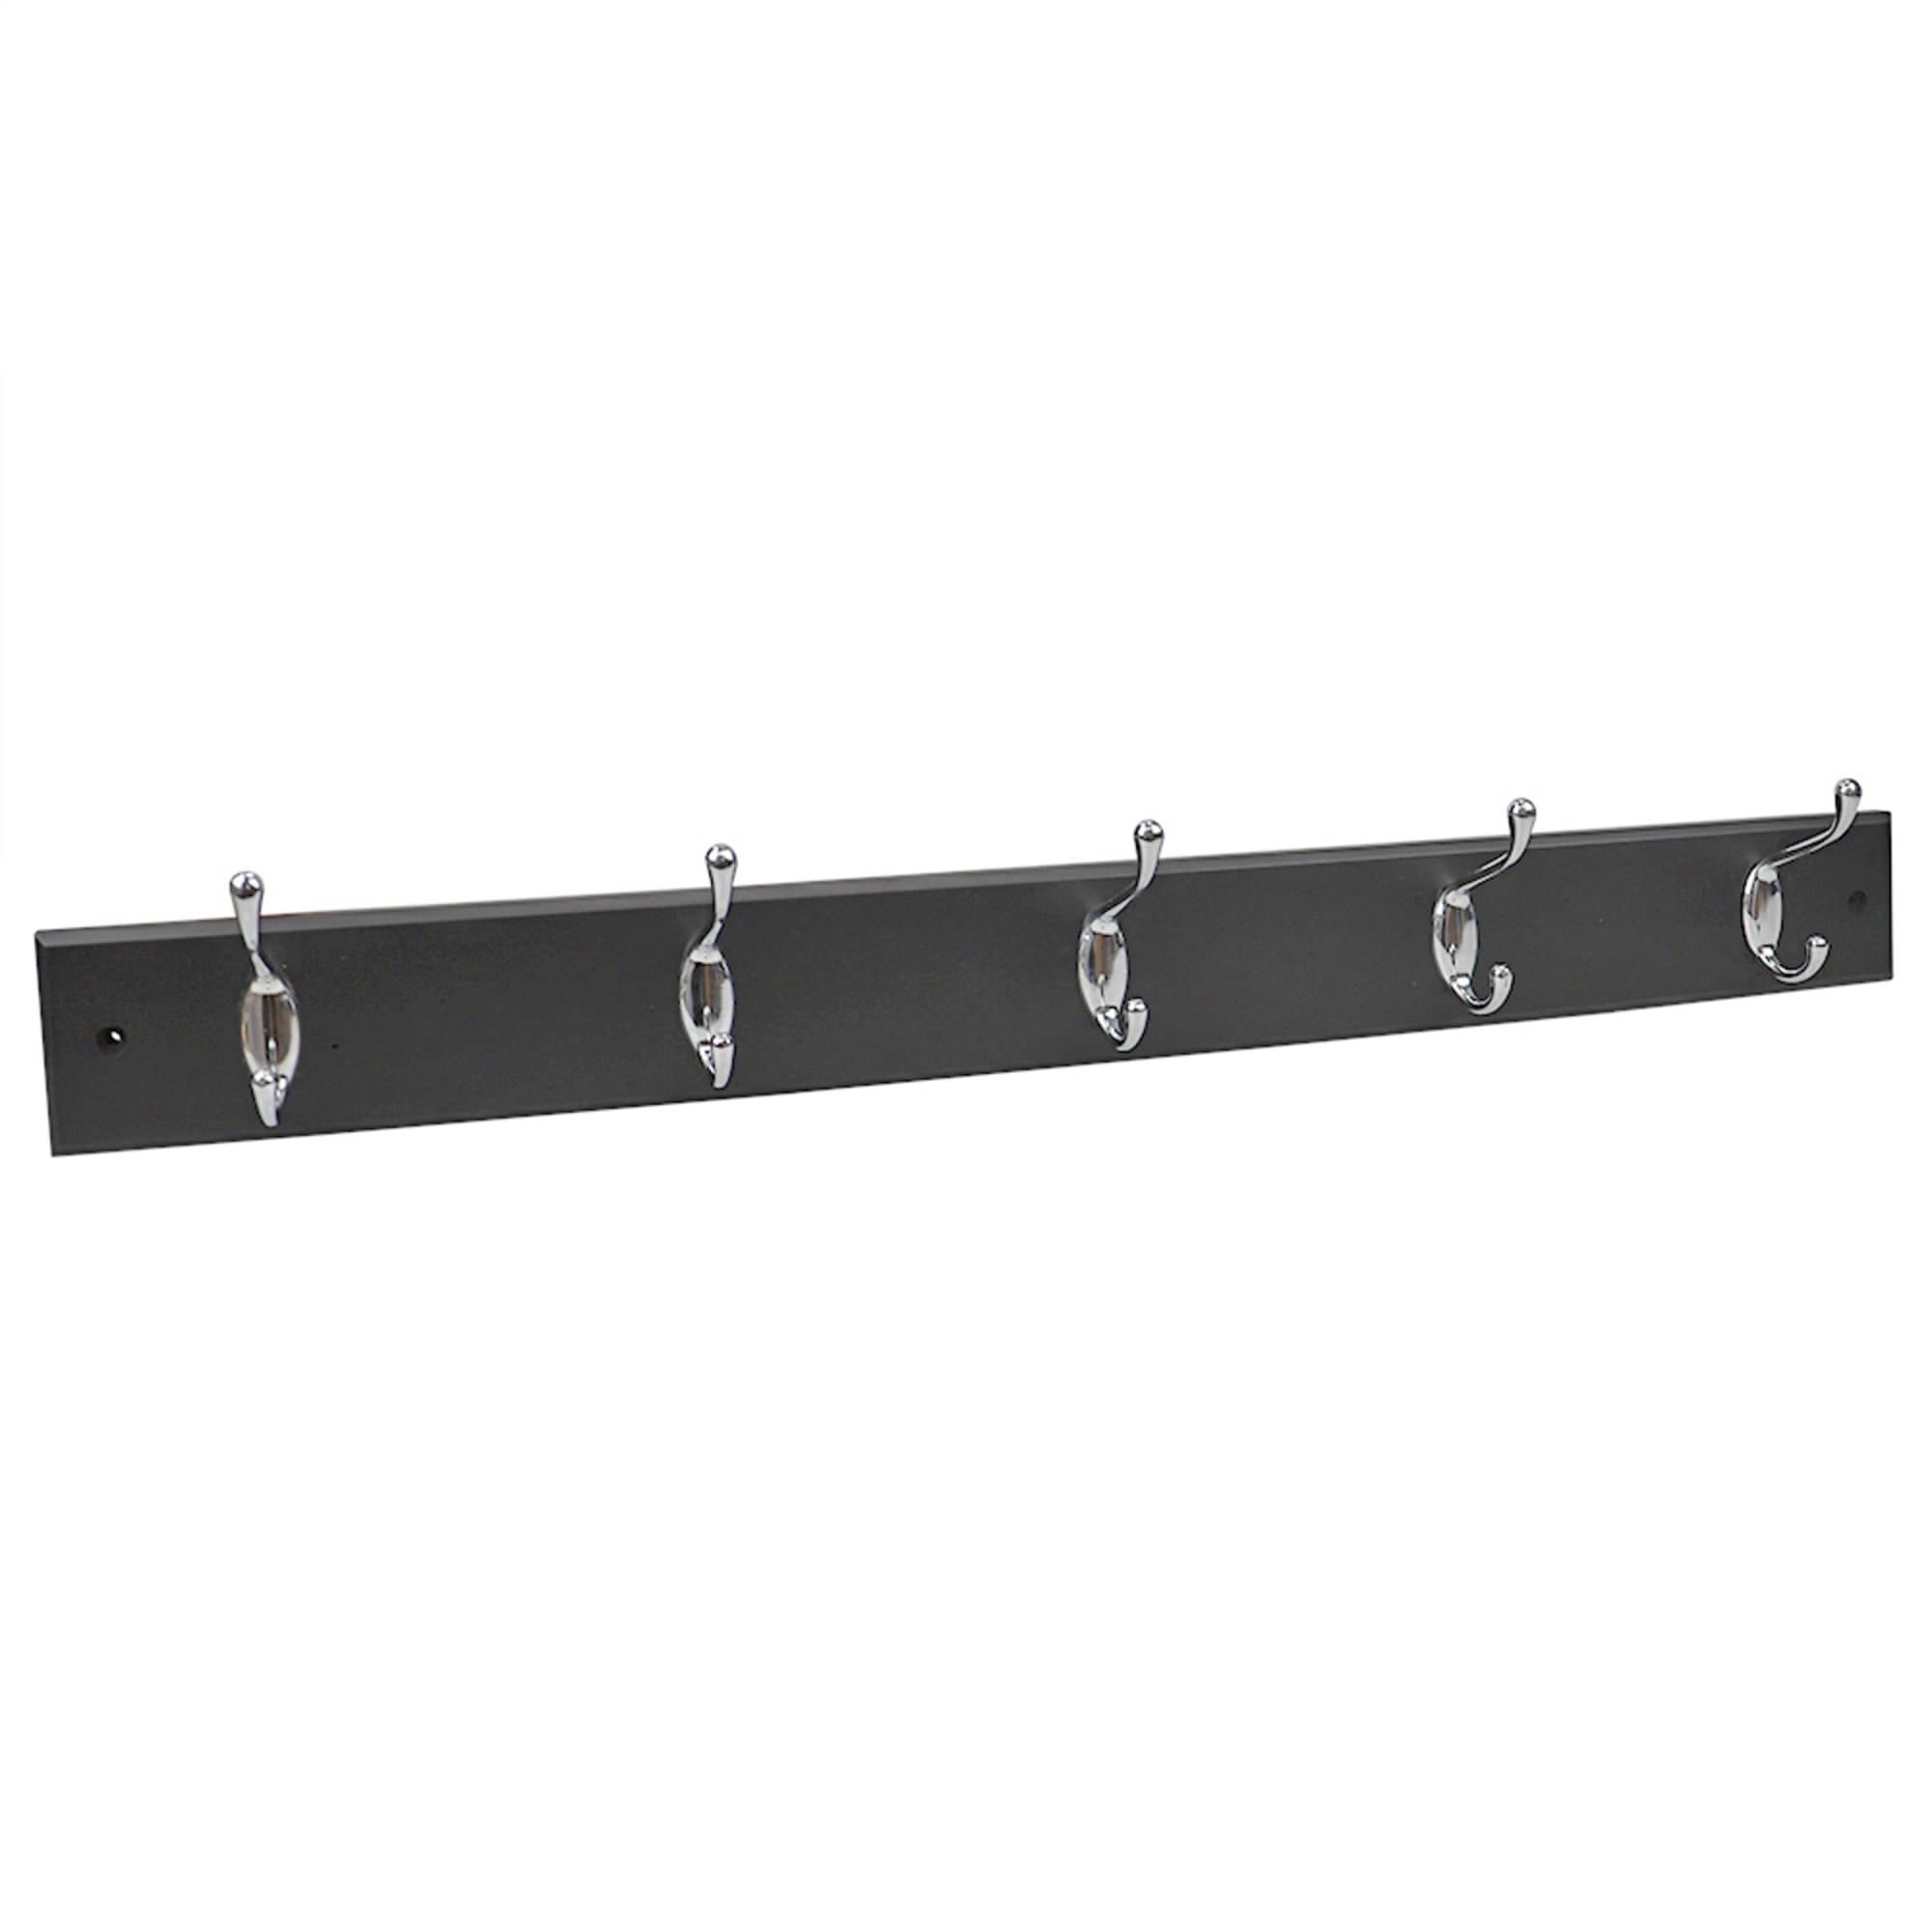 Home Basics 5 Double Hook Wall Mounted Hanging Rack, Black $12.00 EACH, CASE PACK OF 12